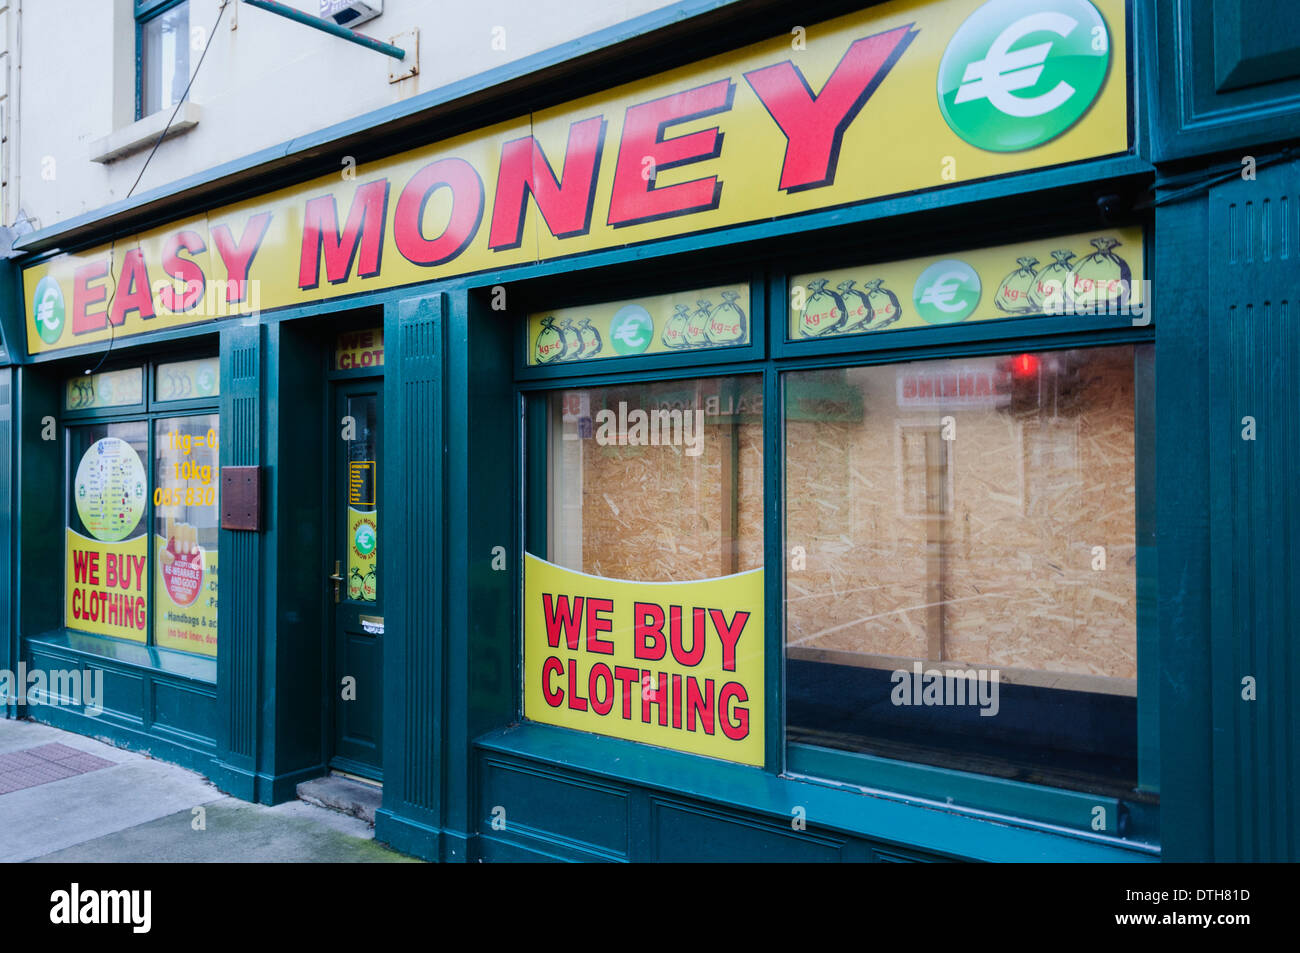 Easy Money shop which buys clothing for cash to recycle Stock Photo